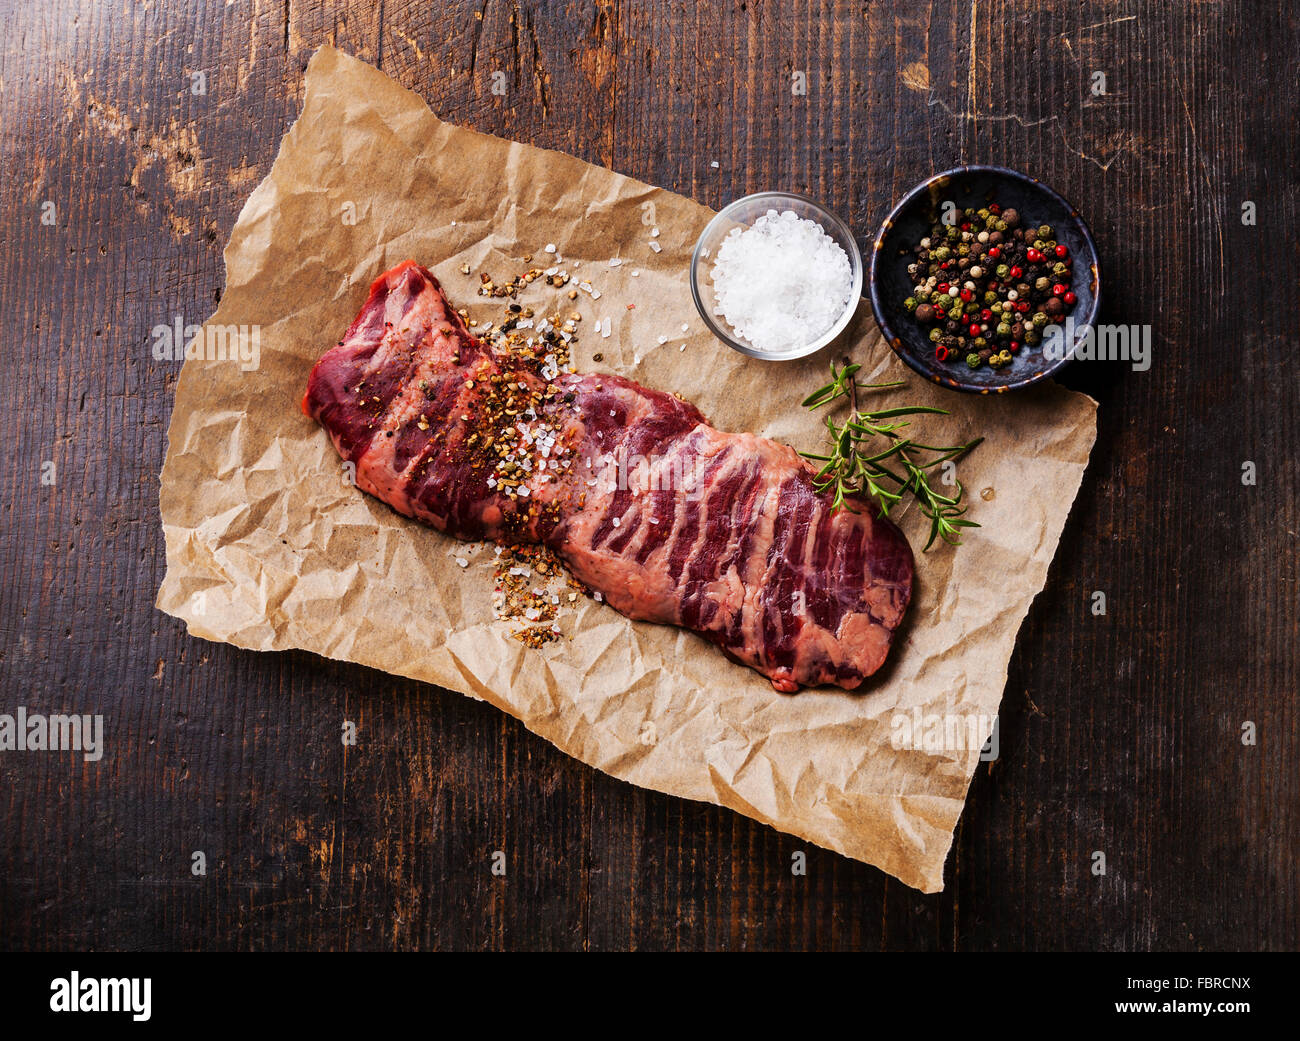 Machete Steak High Resolution Stock Photography and Images - Alamy